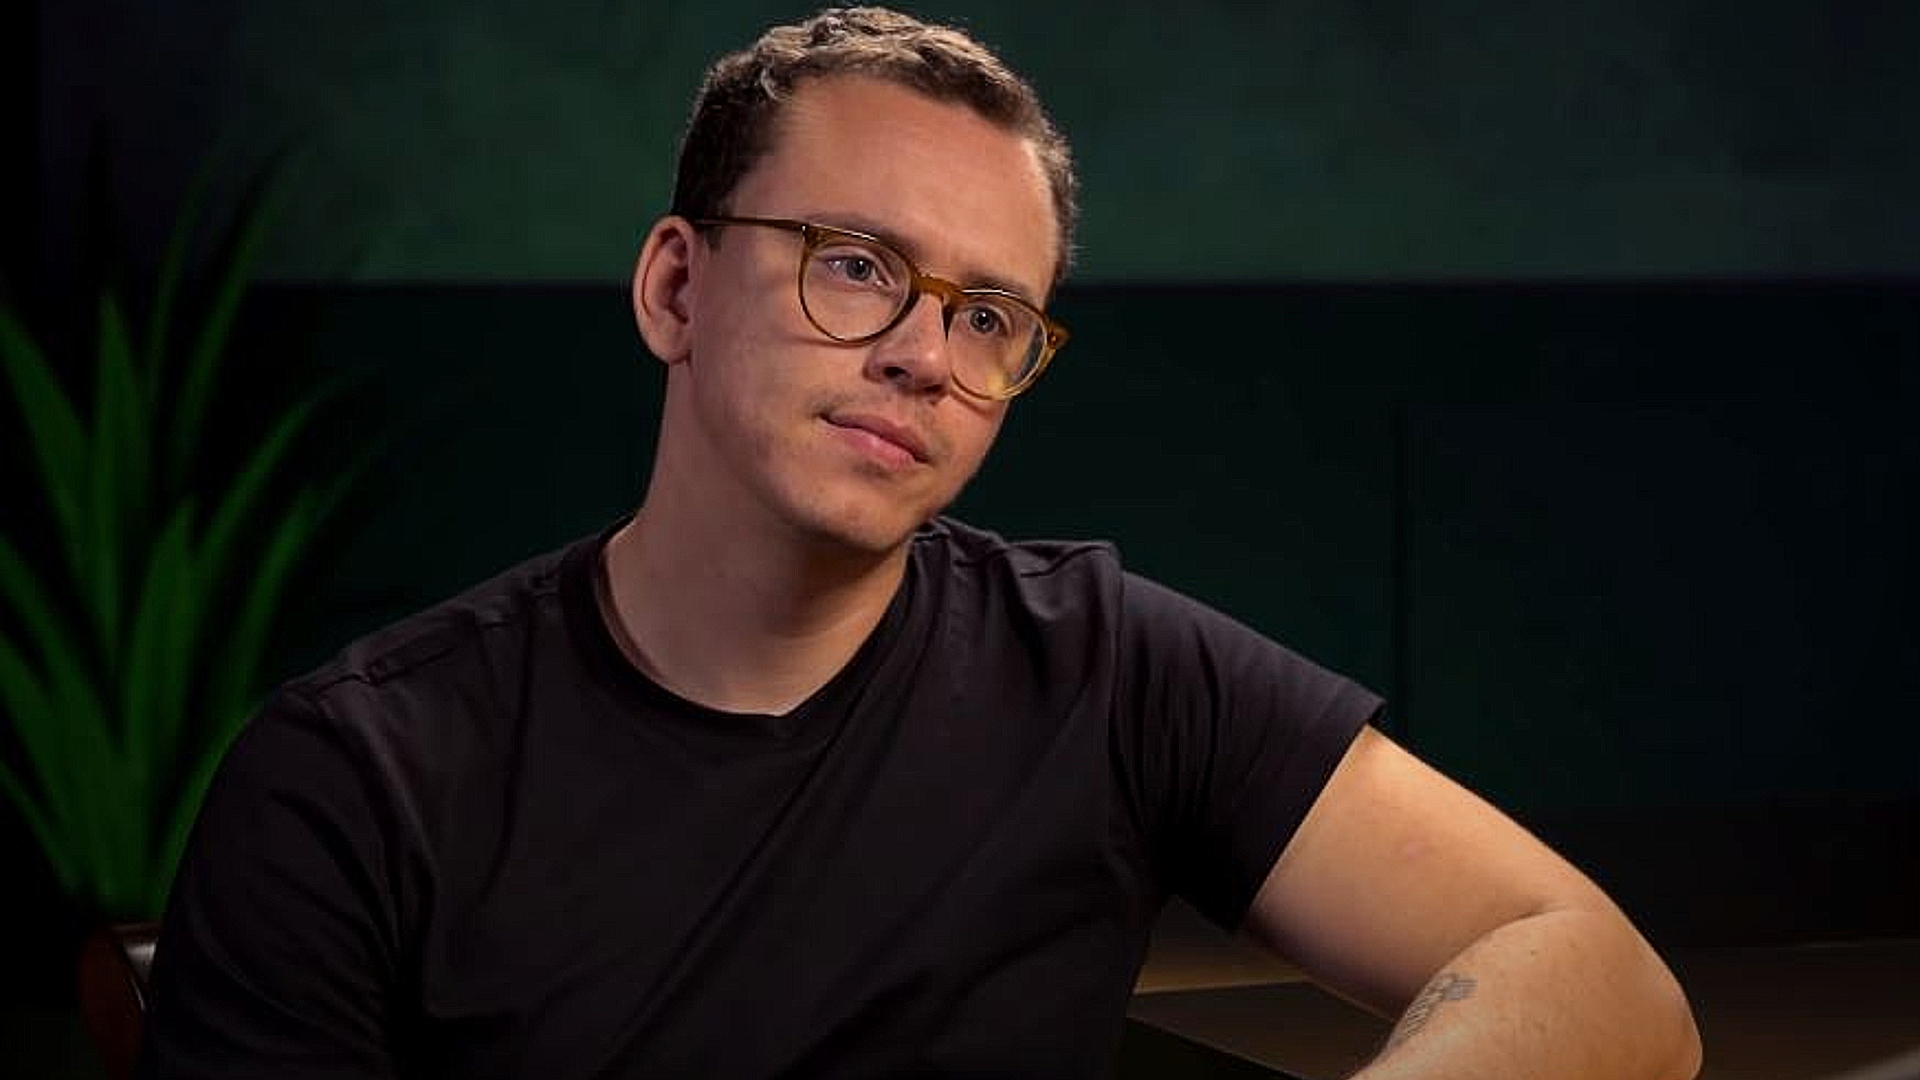 Logic explains why he loves watching Twitch chess streamer